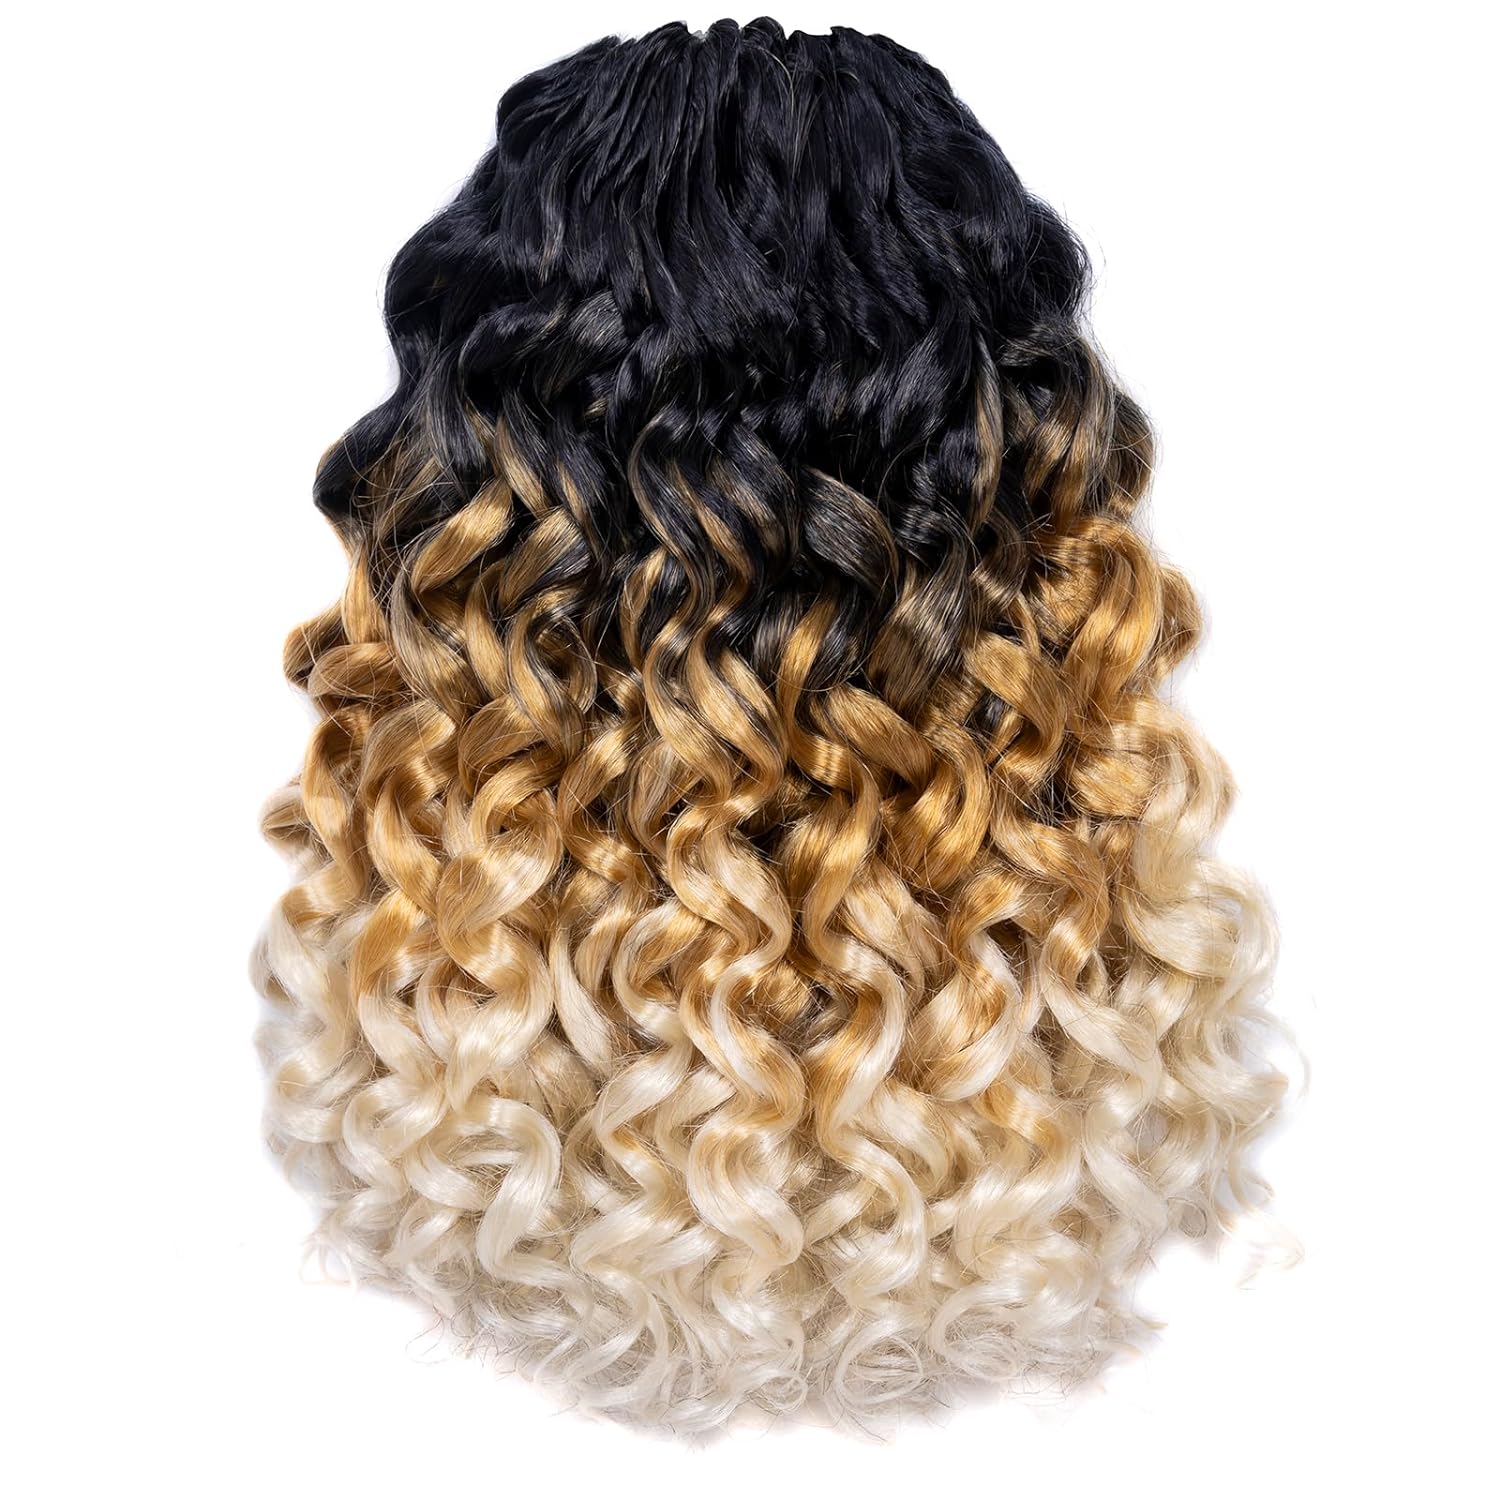 FAST SHIPPING 3-5 DAY OC | Toyotress Ocean Wave Crochet Hair - 8 Packs Short Curly Water Wave Deep Twist Wavy Braids For Black Women Synthetic Braiding Hair Extensions